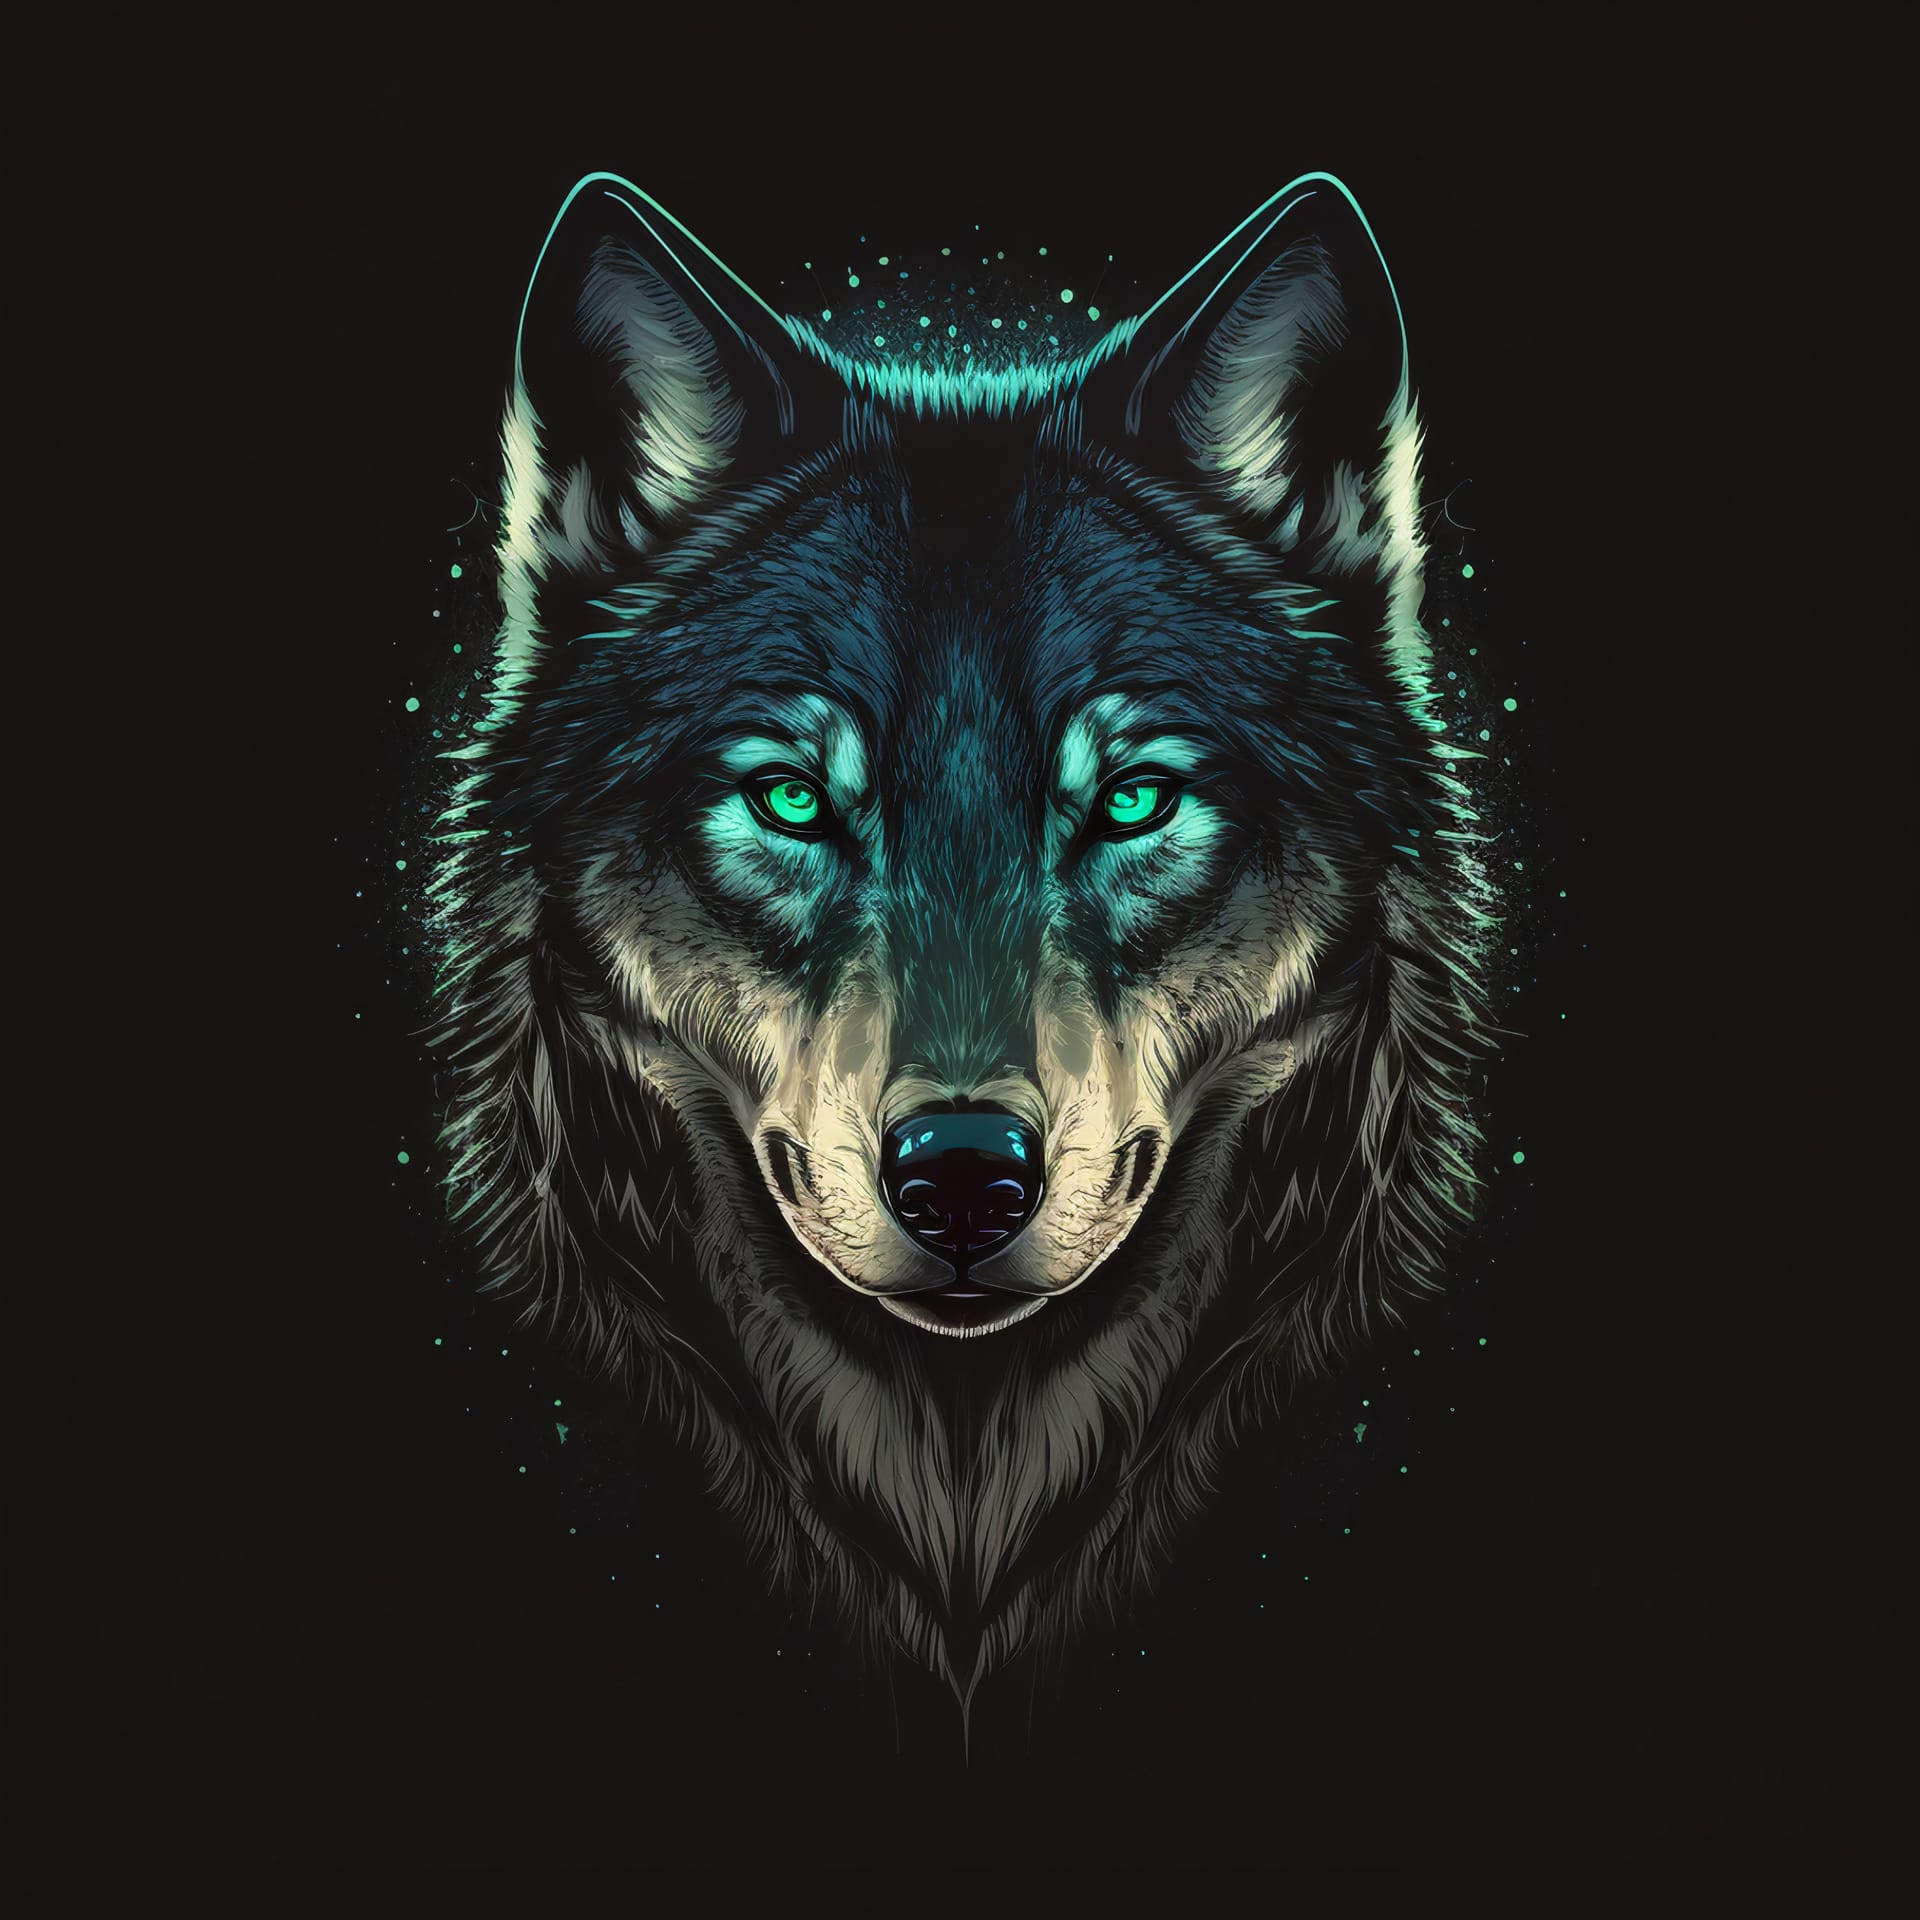 Illustration front view wolf head surprisingly perfect design image